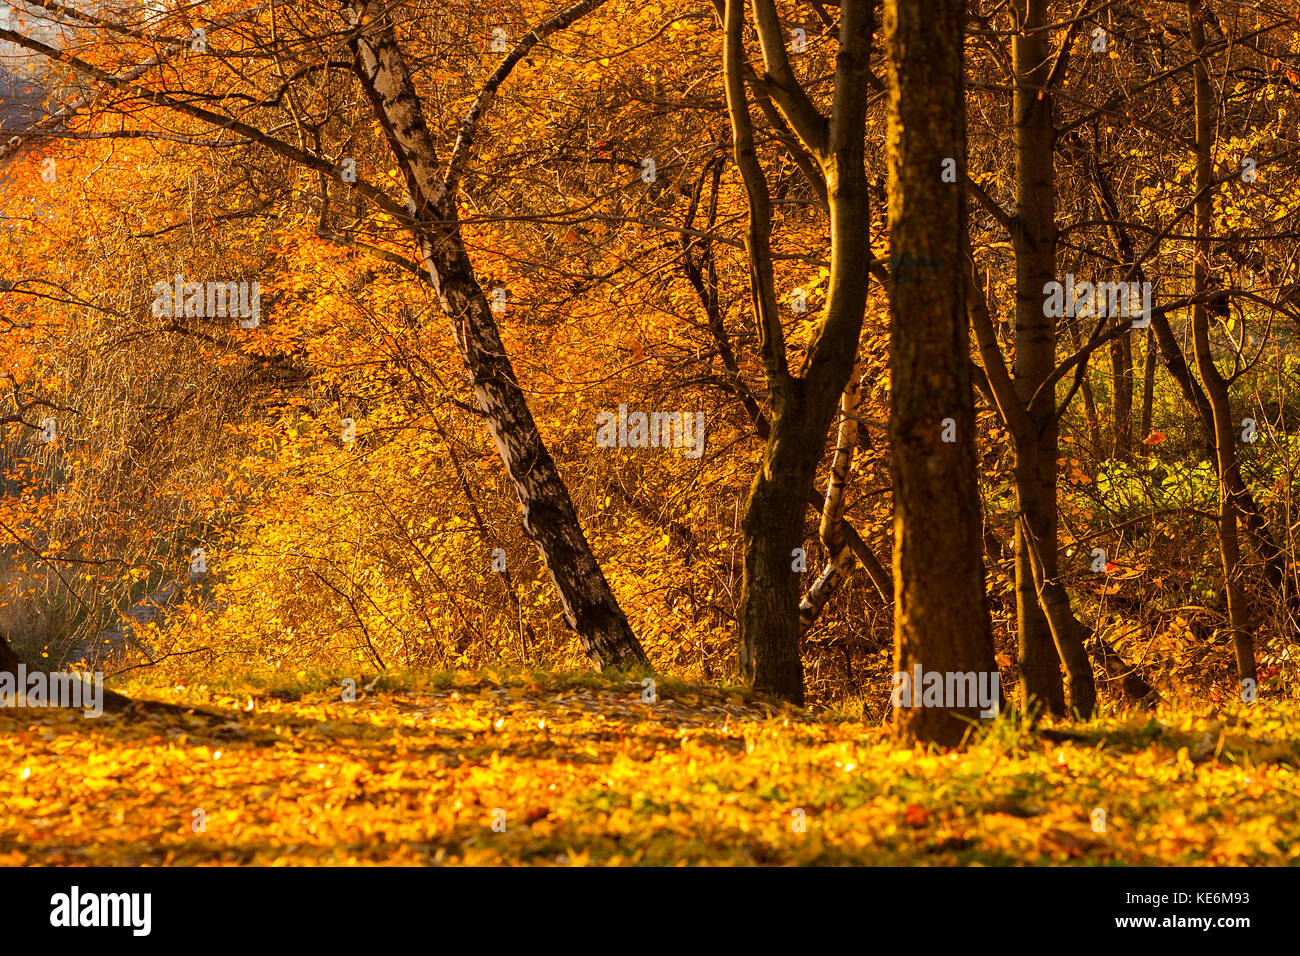 Trees in a park by an autumn day with yellow, green and red leaves and grass around covered by foliage. Stock Photo